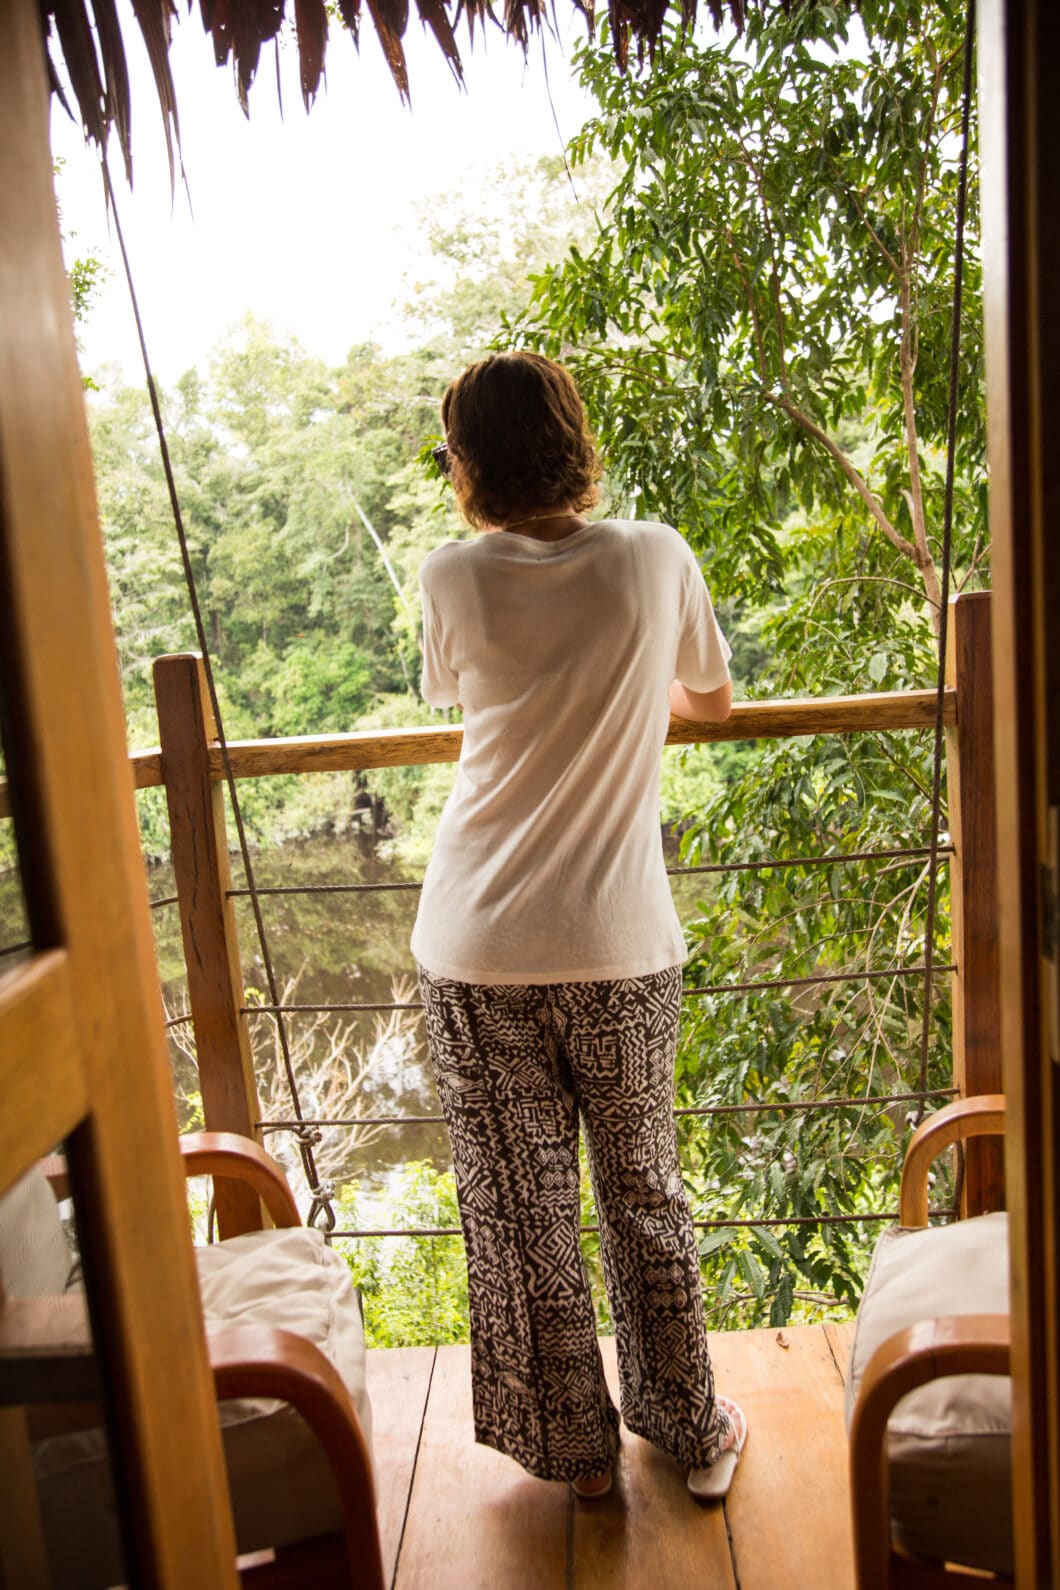 A woman stands at a balcony, looking out across the tropical forest landscape. She has her back turned to the camera and is wearing a white shirt and black and white patterned pants.